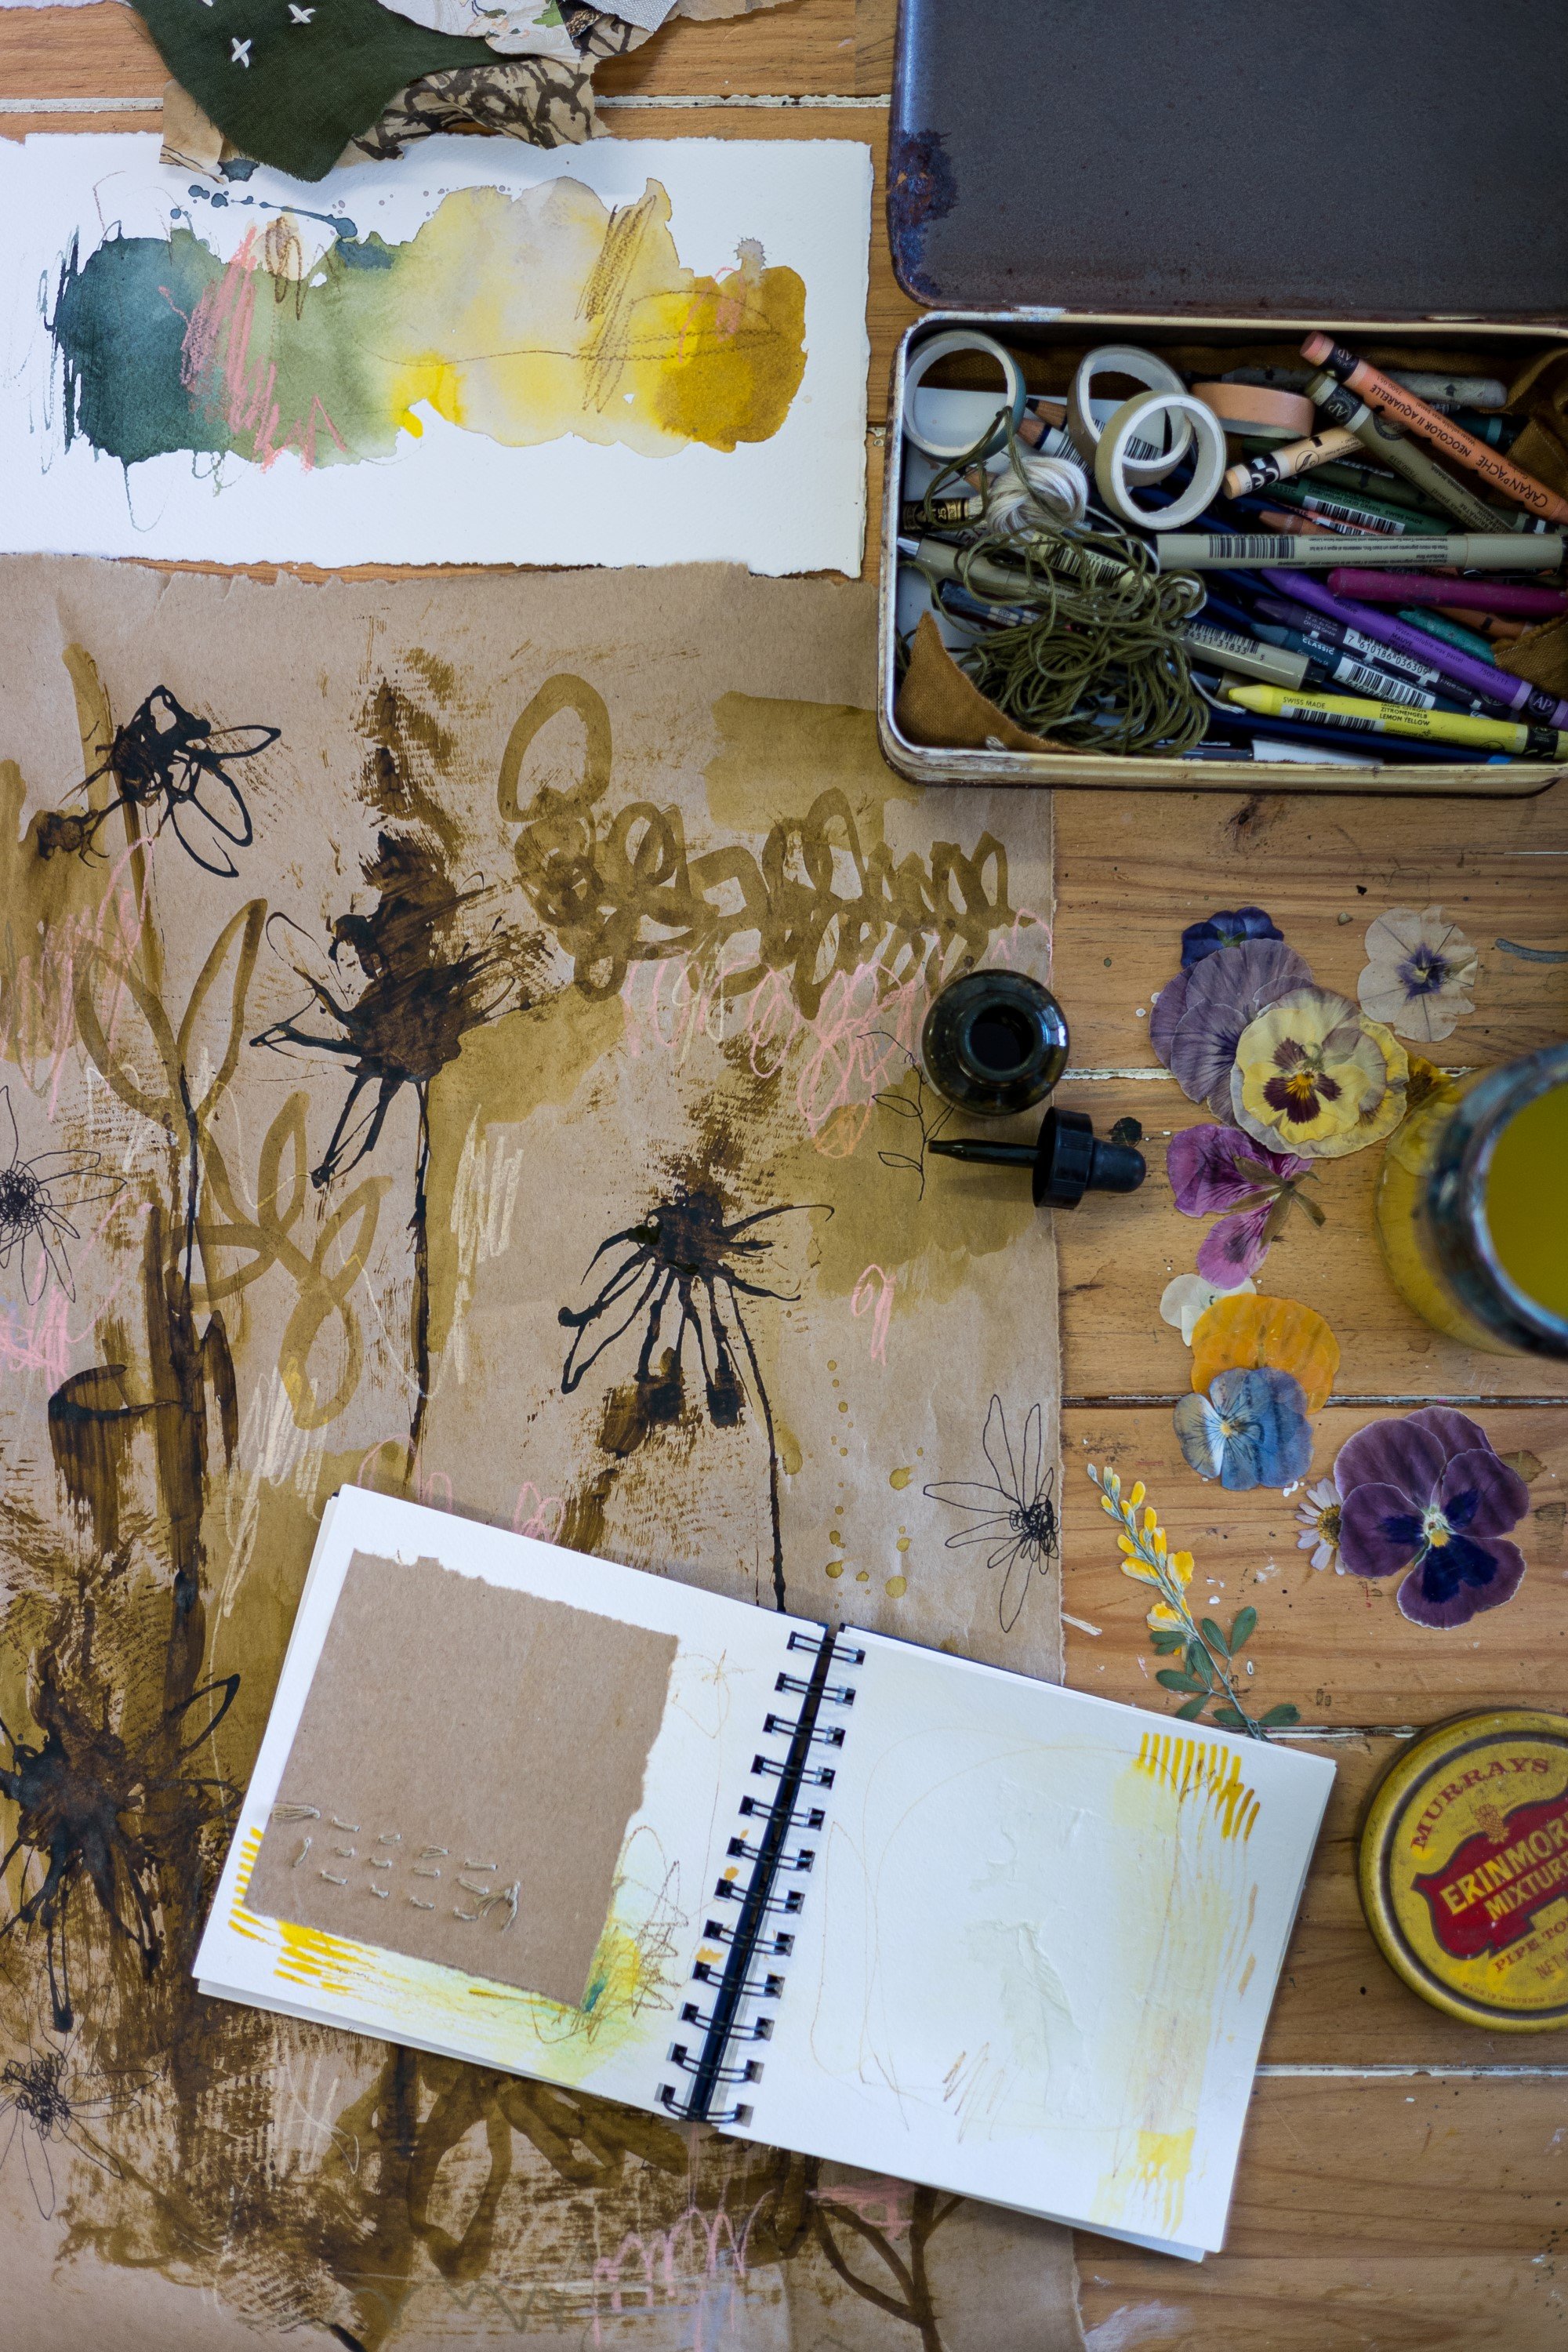  Piece of brown craft paper that has loose flowers painted on it with ink. The paper is surrounded by art supplies.  